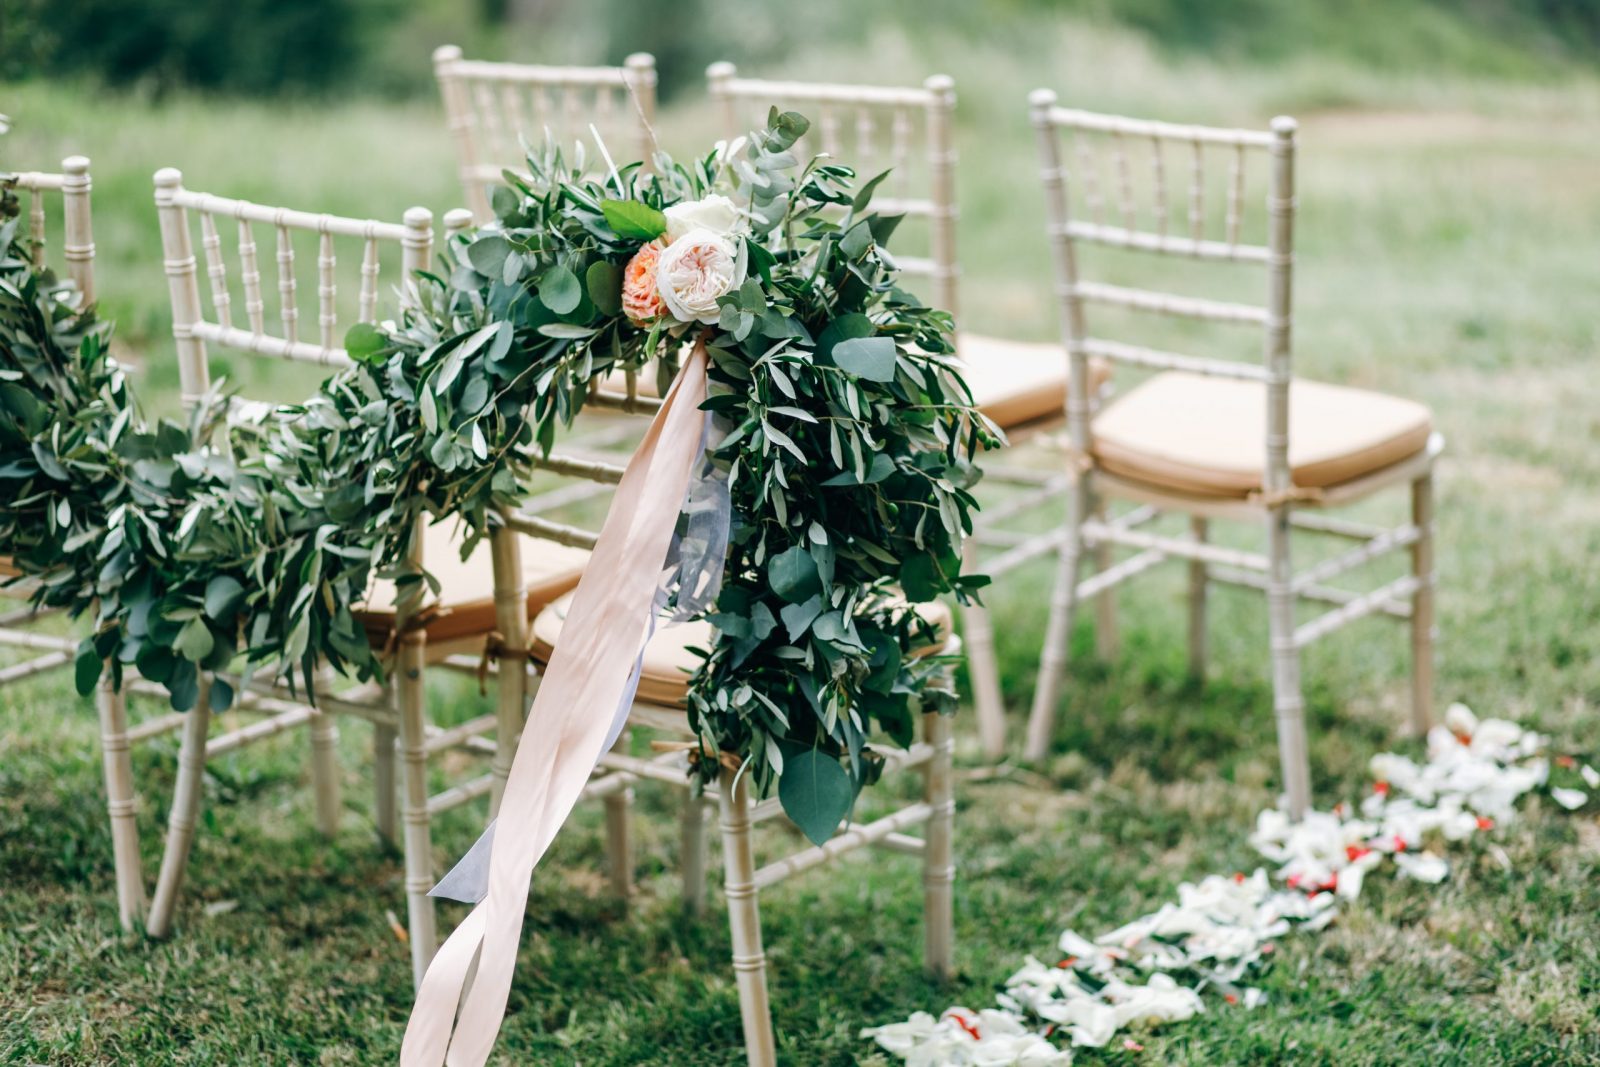 Floral garlands of green eucalyptus and pink flowers decorate wedding arch and chairs on the hill